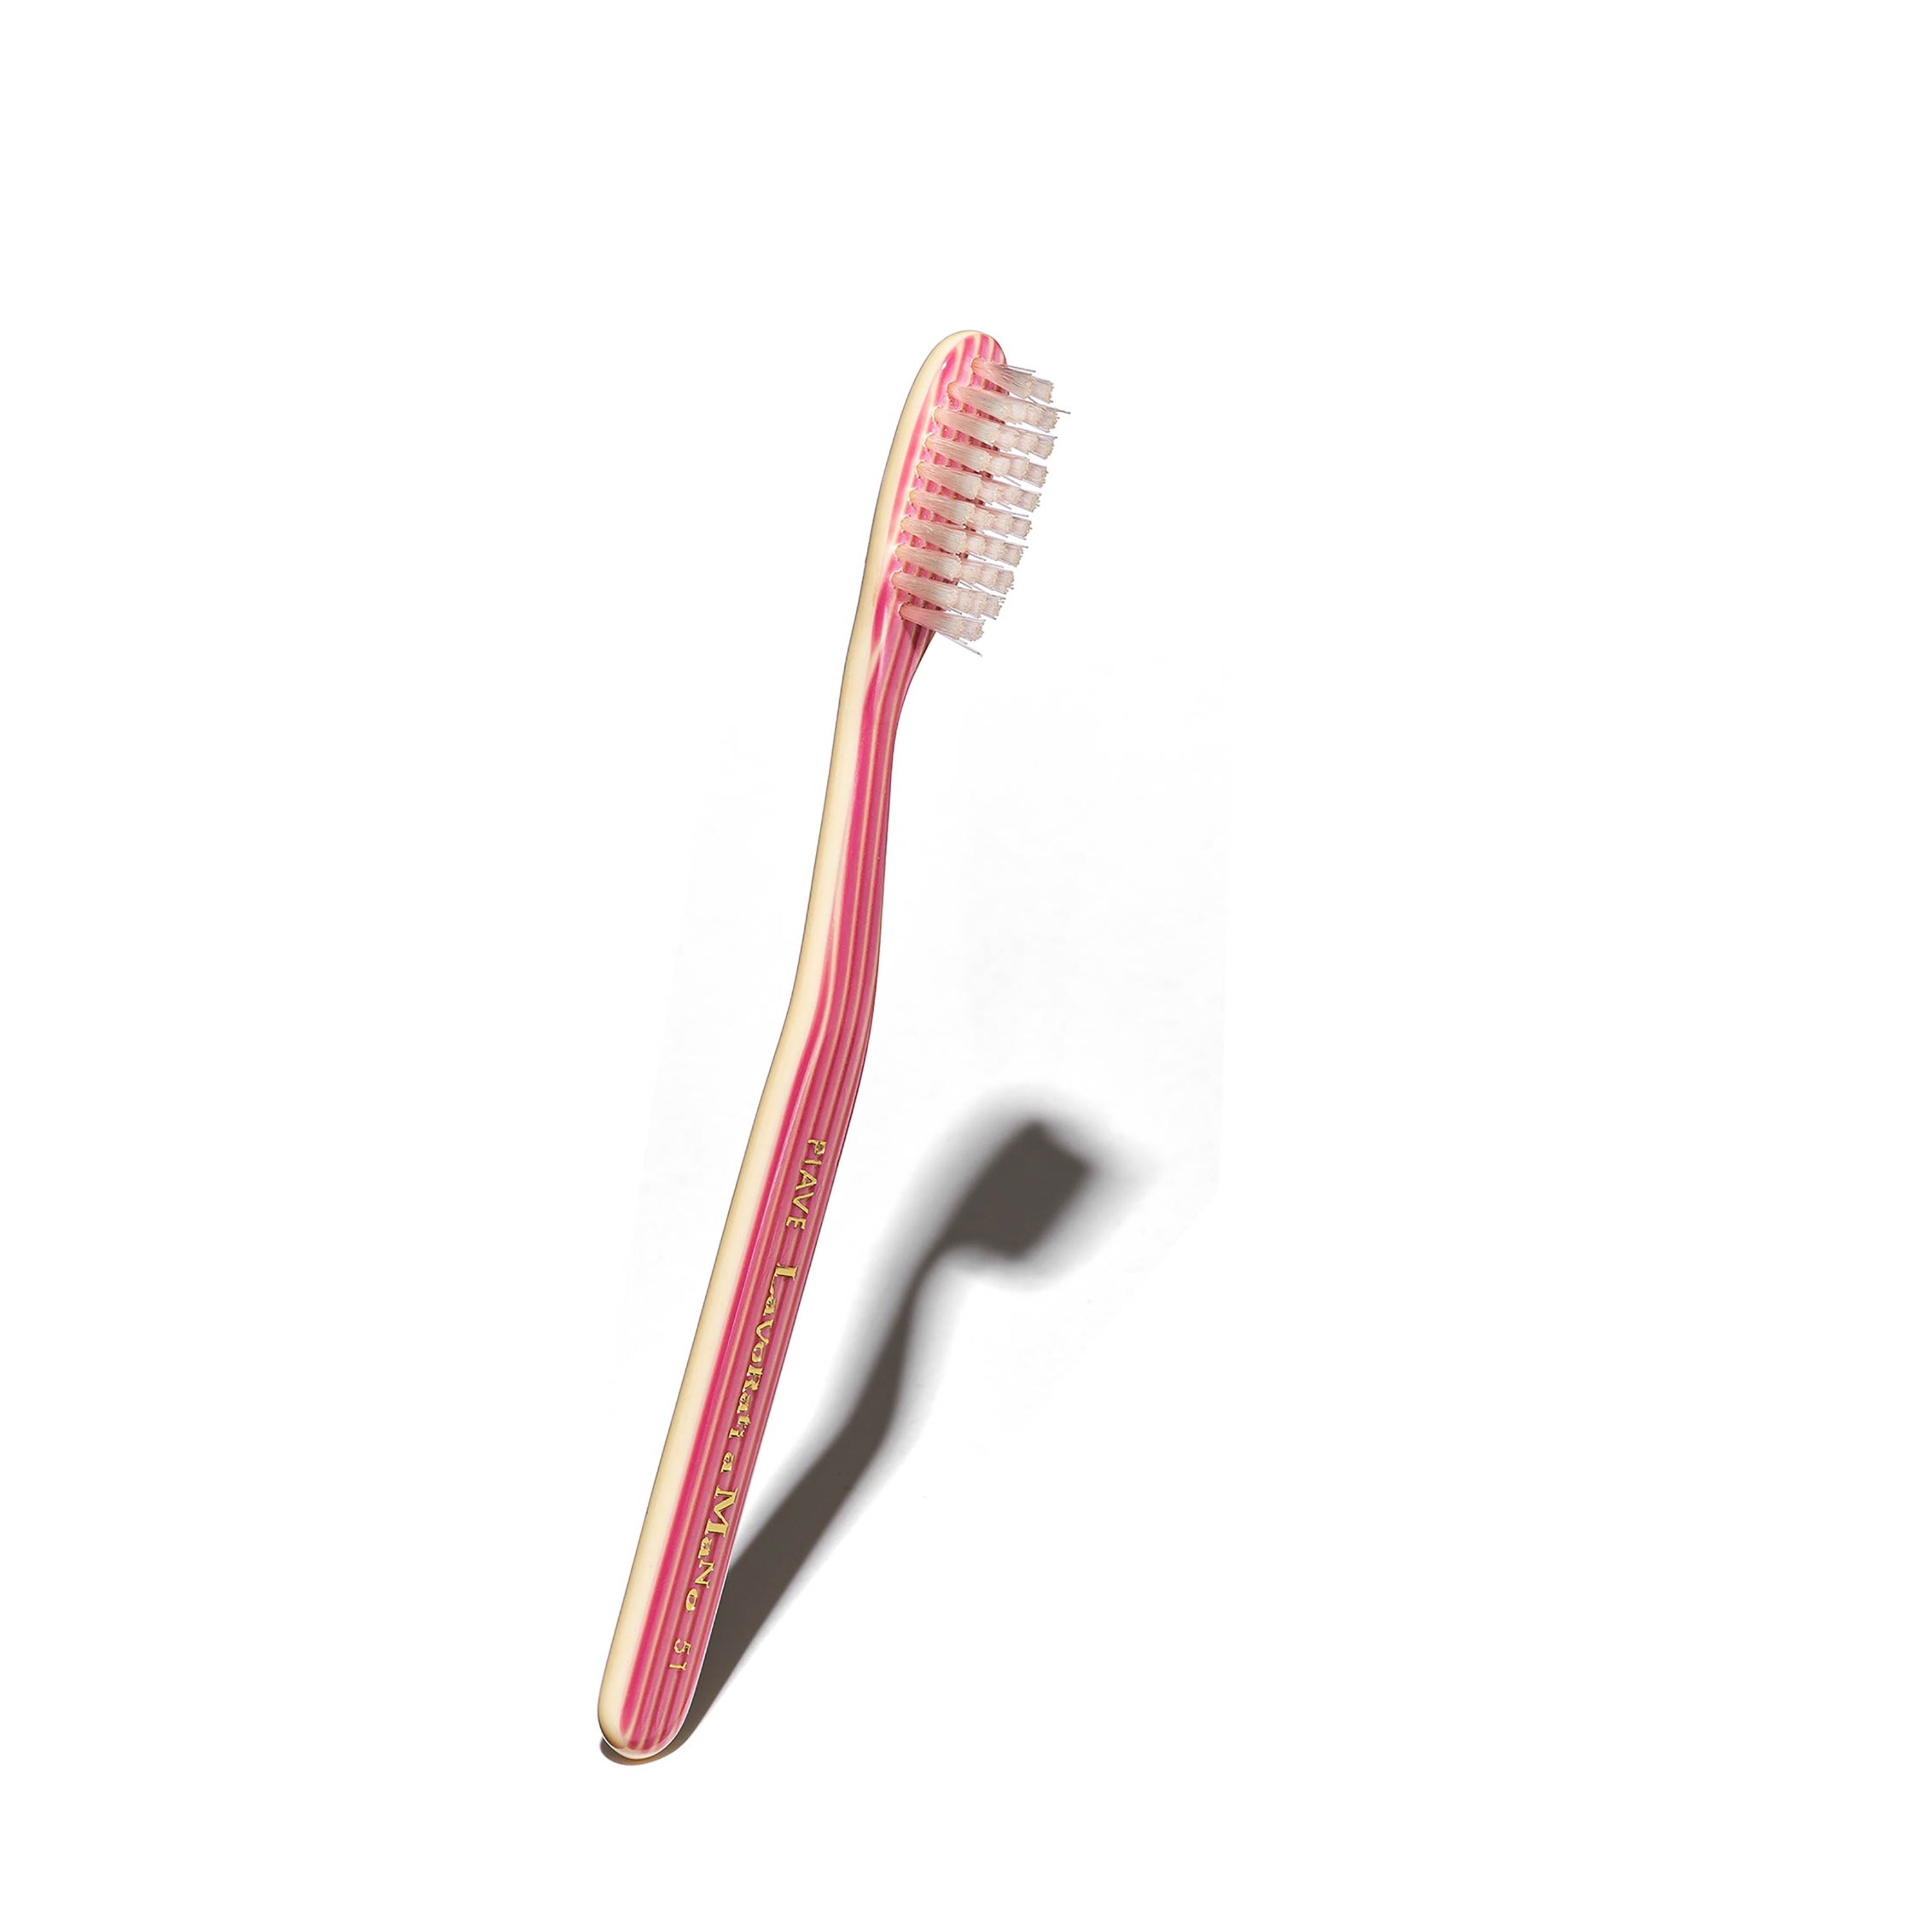 Capri Toothbrush - Officine Universelle Buly